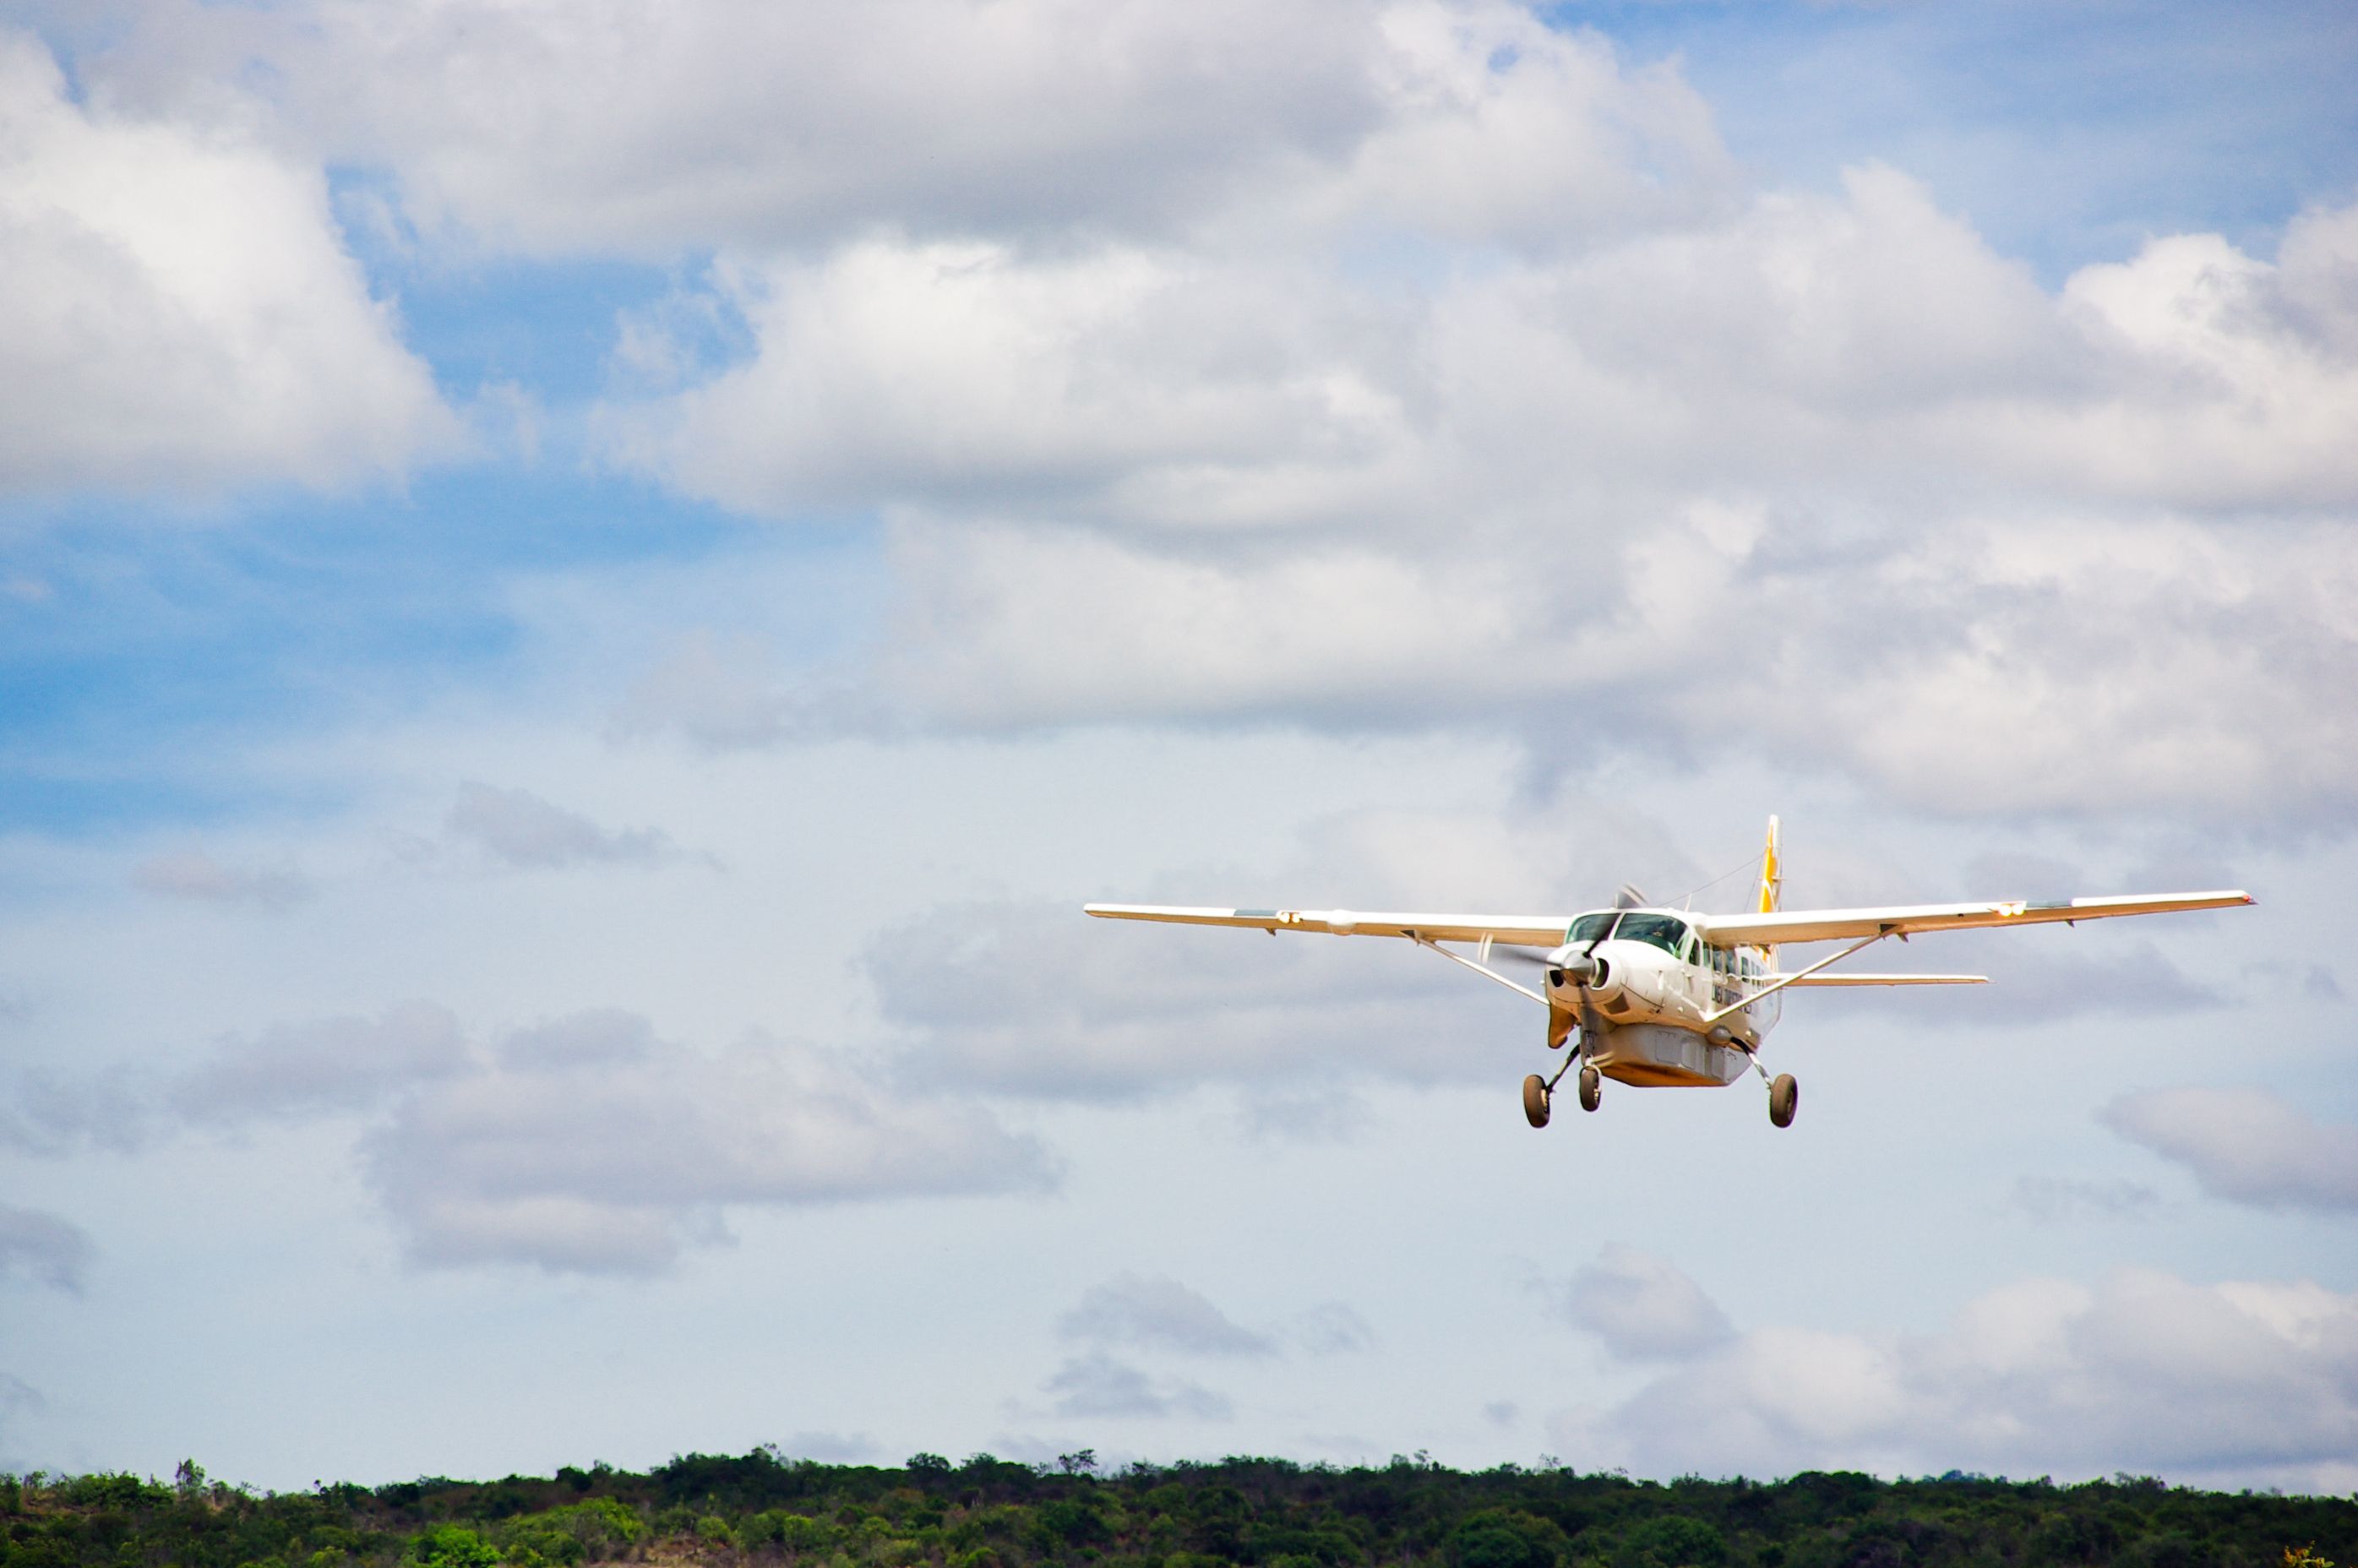 Small white plane with propeller in cloudy sky over jungle.